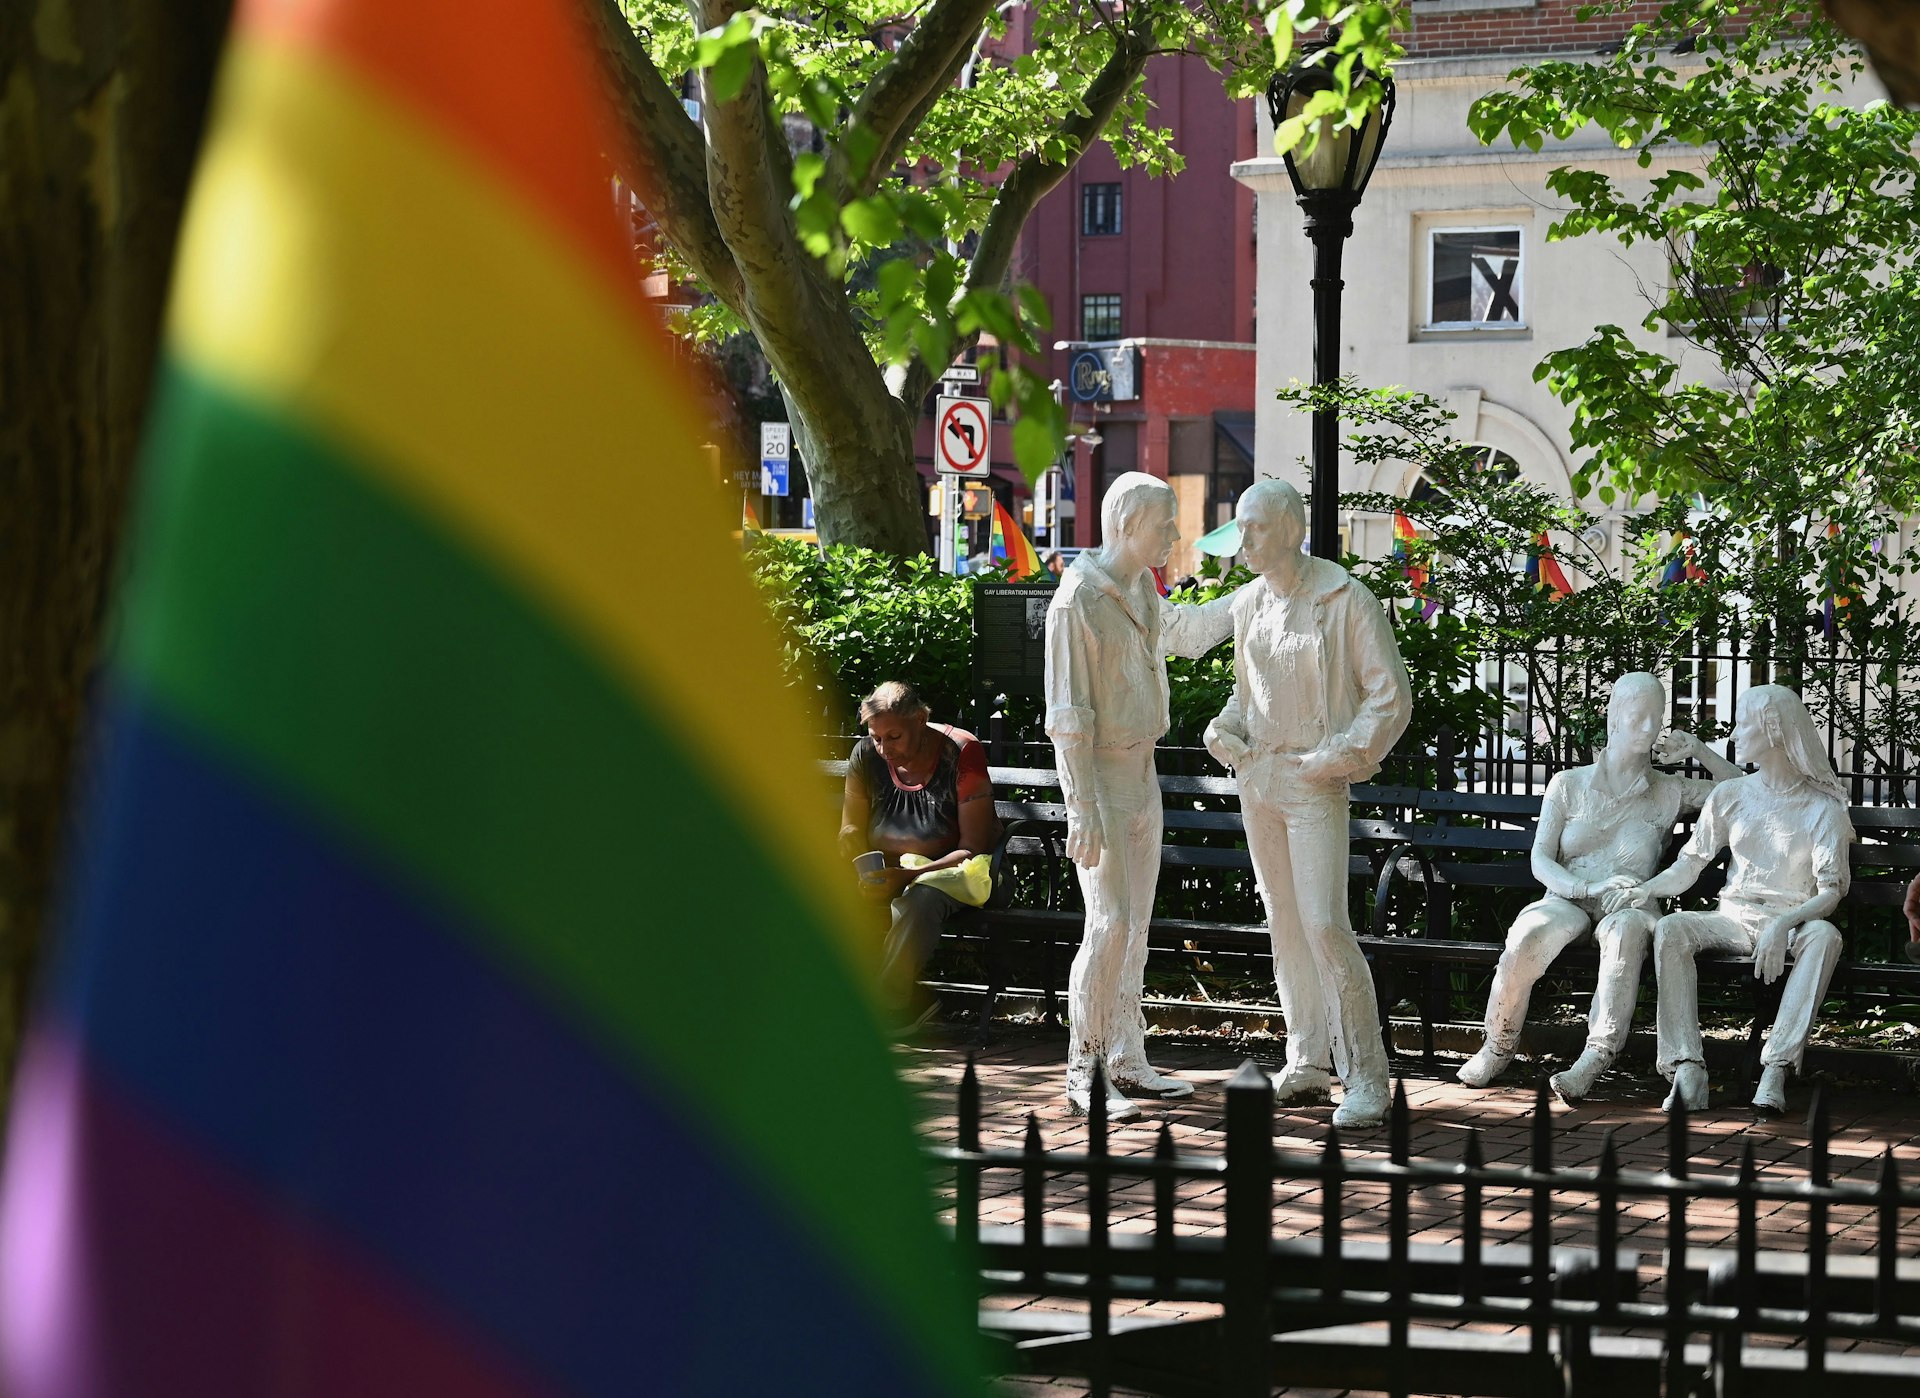 Rainbow flags and sculptures are seen at the Stonewall National Monument, West Village, New York City, New York, USA